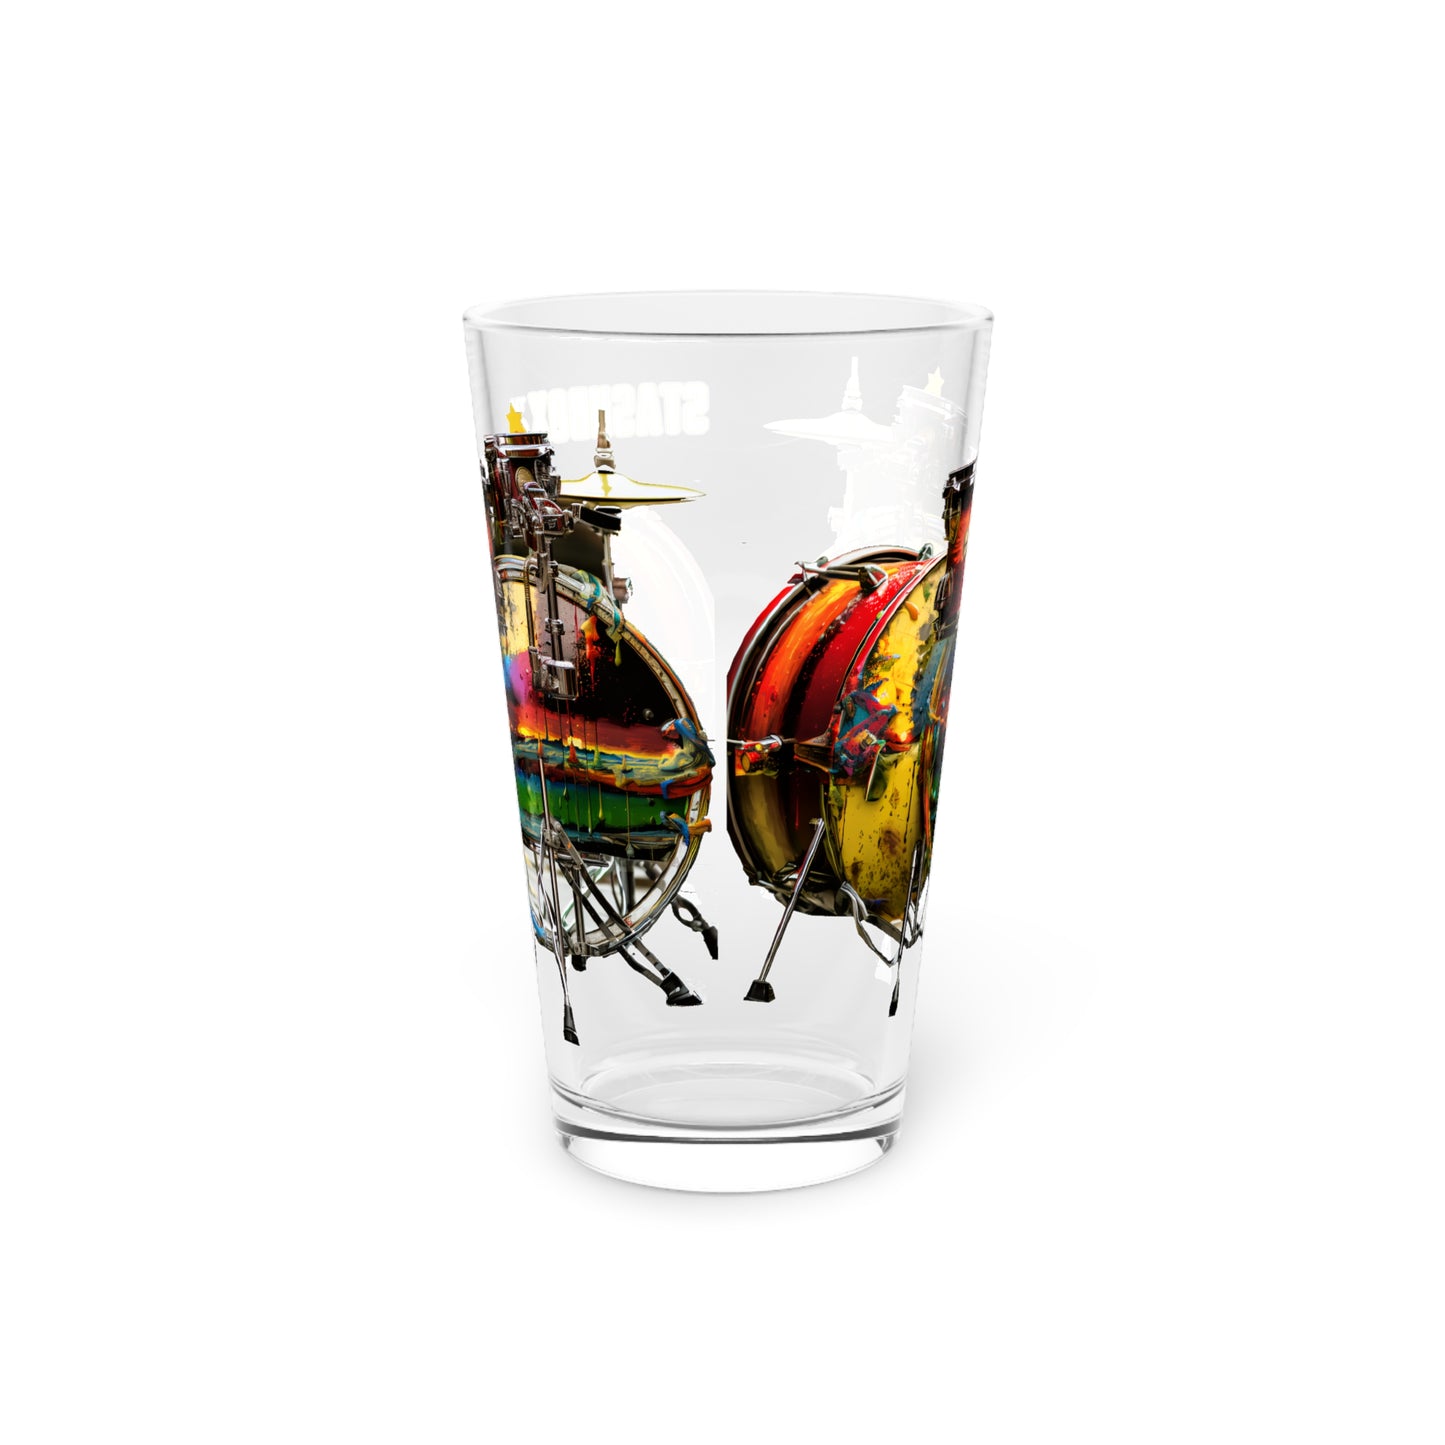 Colorful Paint Drip Art on Drum Kit - Psychedelic Art Pint Glass, 16oz - Music Design #006